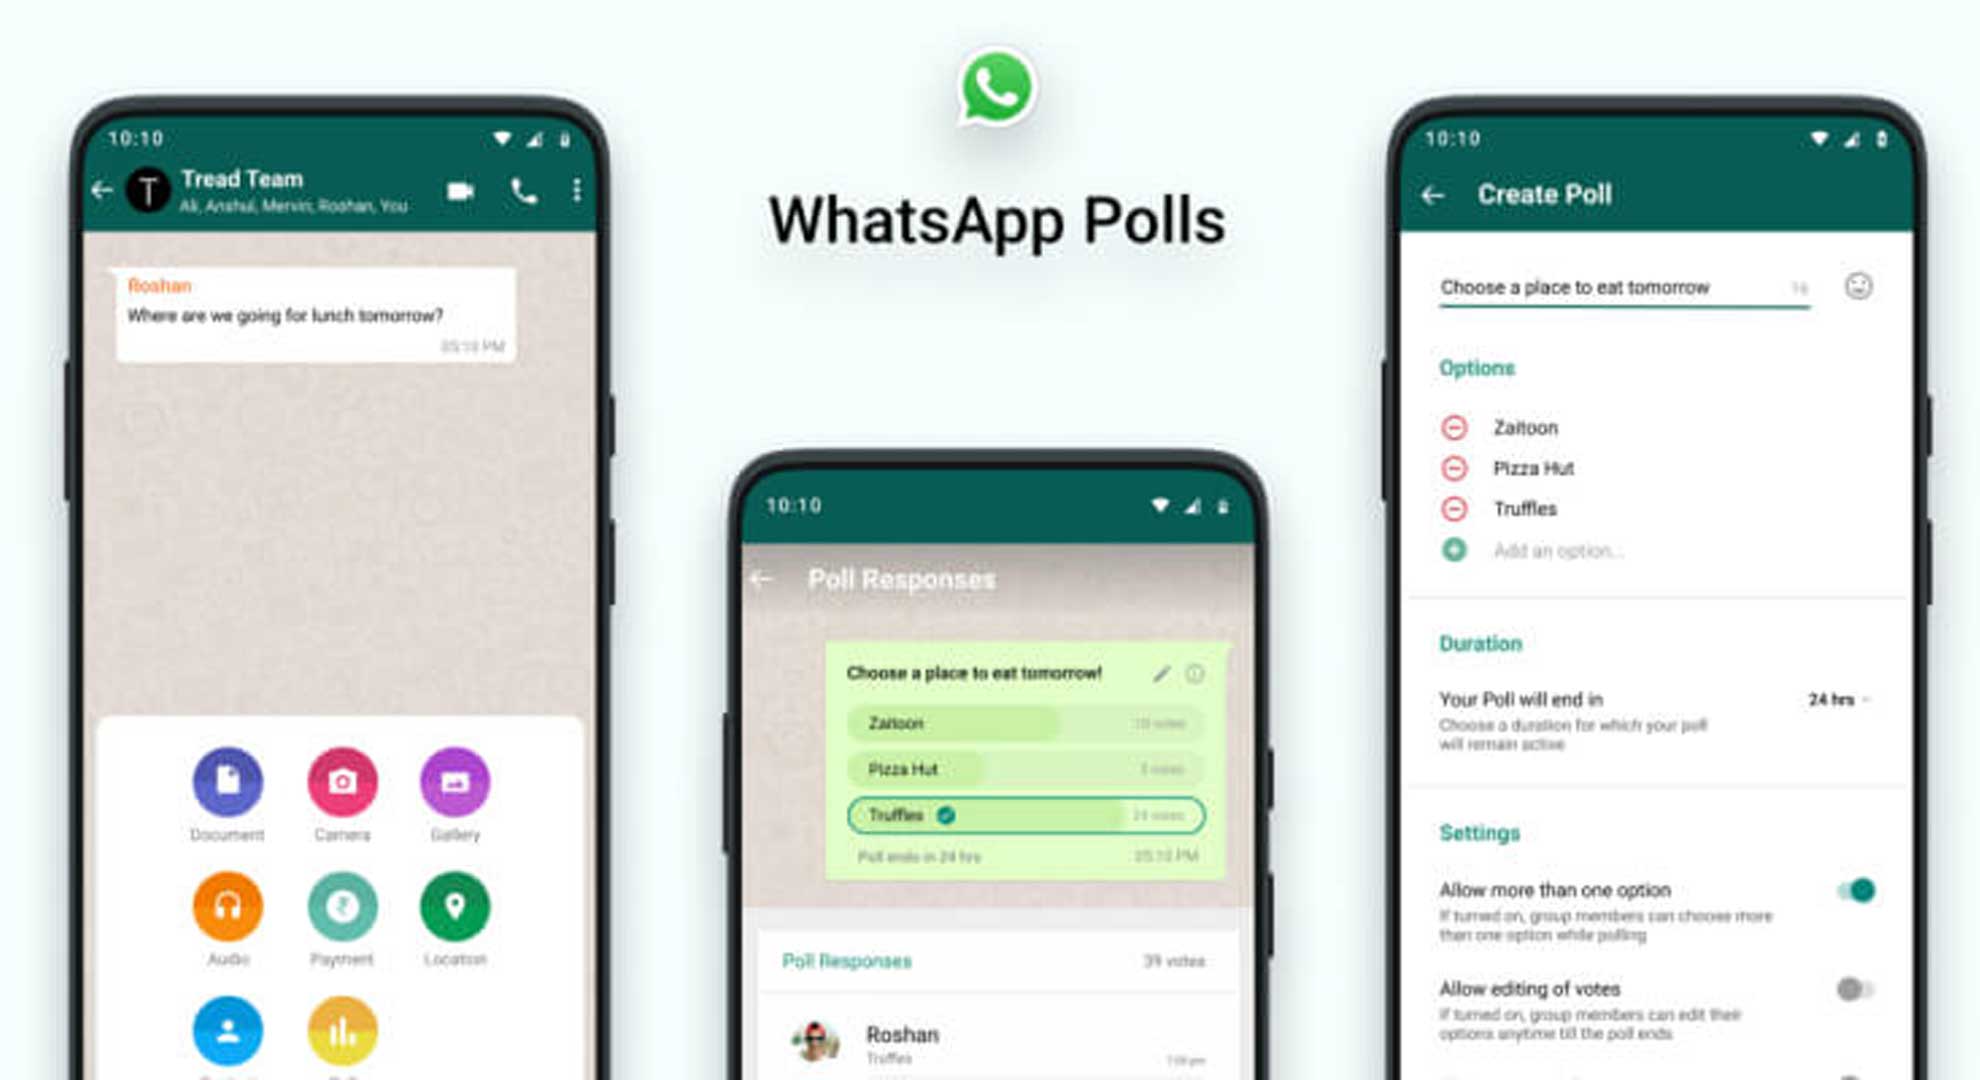 Whatsapp Polls: All You Need To Know About How To Create Polls On WhatsApp